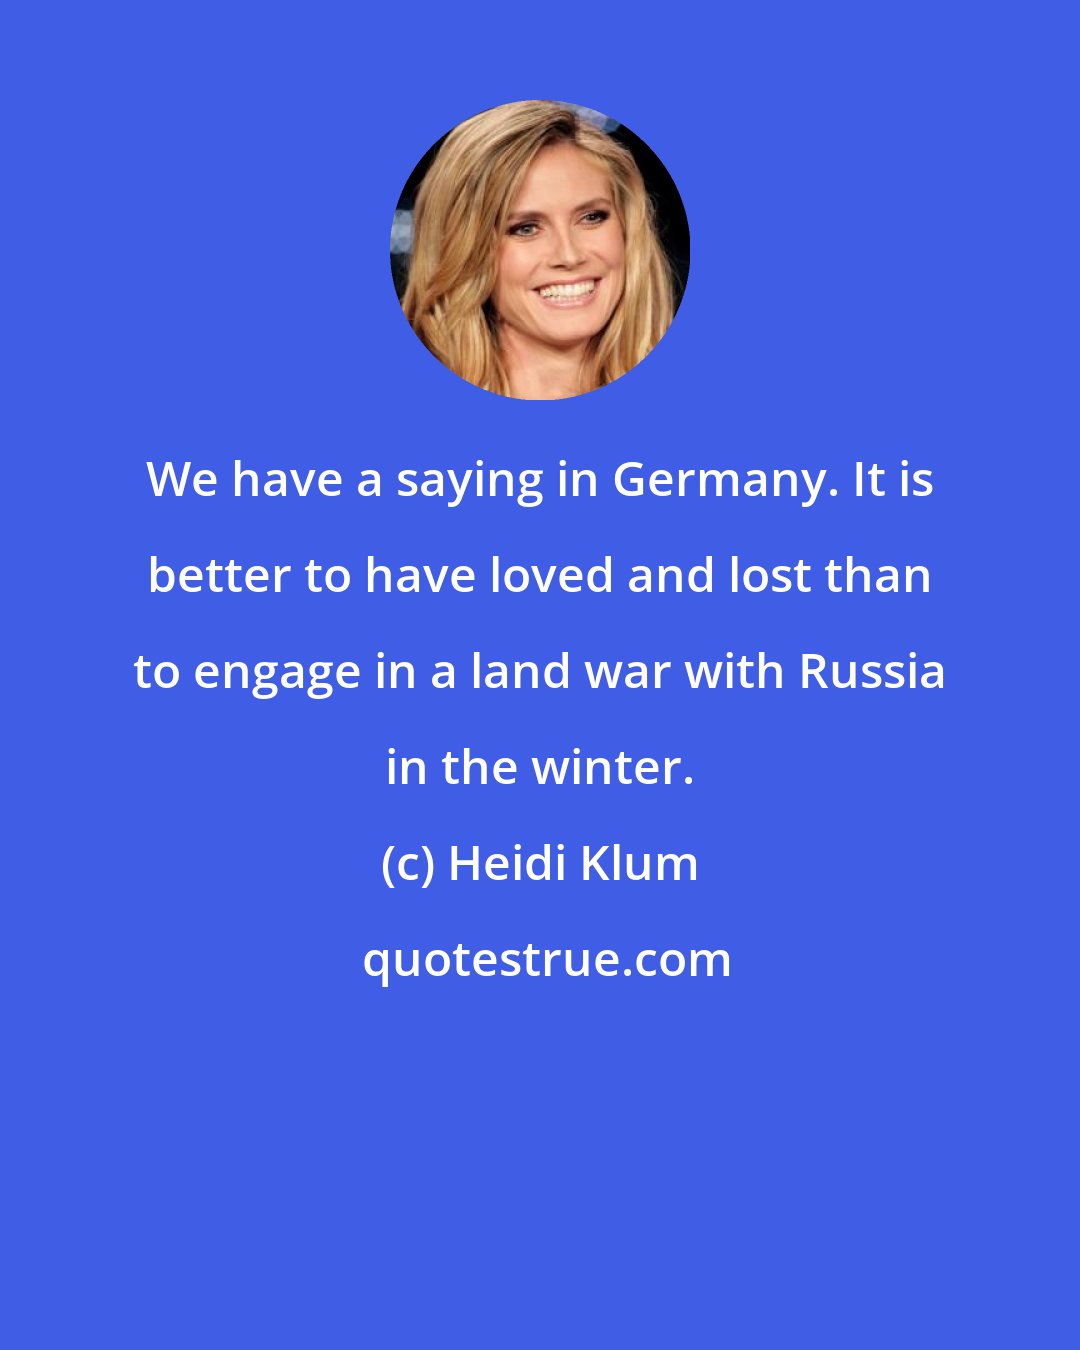 Heidi Klum: We have a saying in Germany. It is better to have loved and lost than to engage in a land war with Russia in the winter.